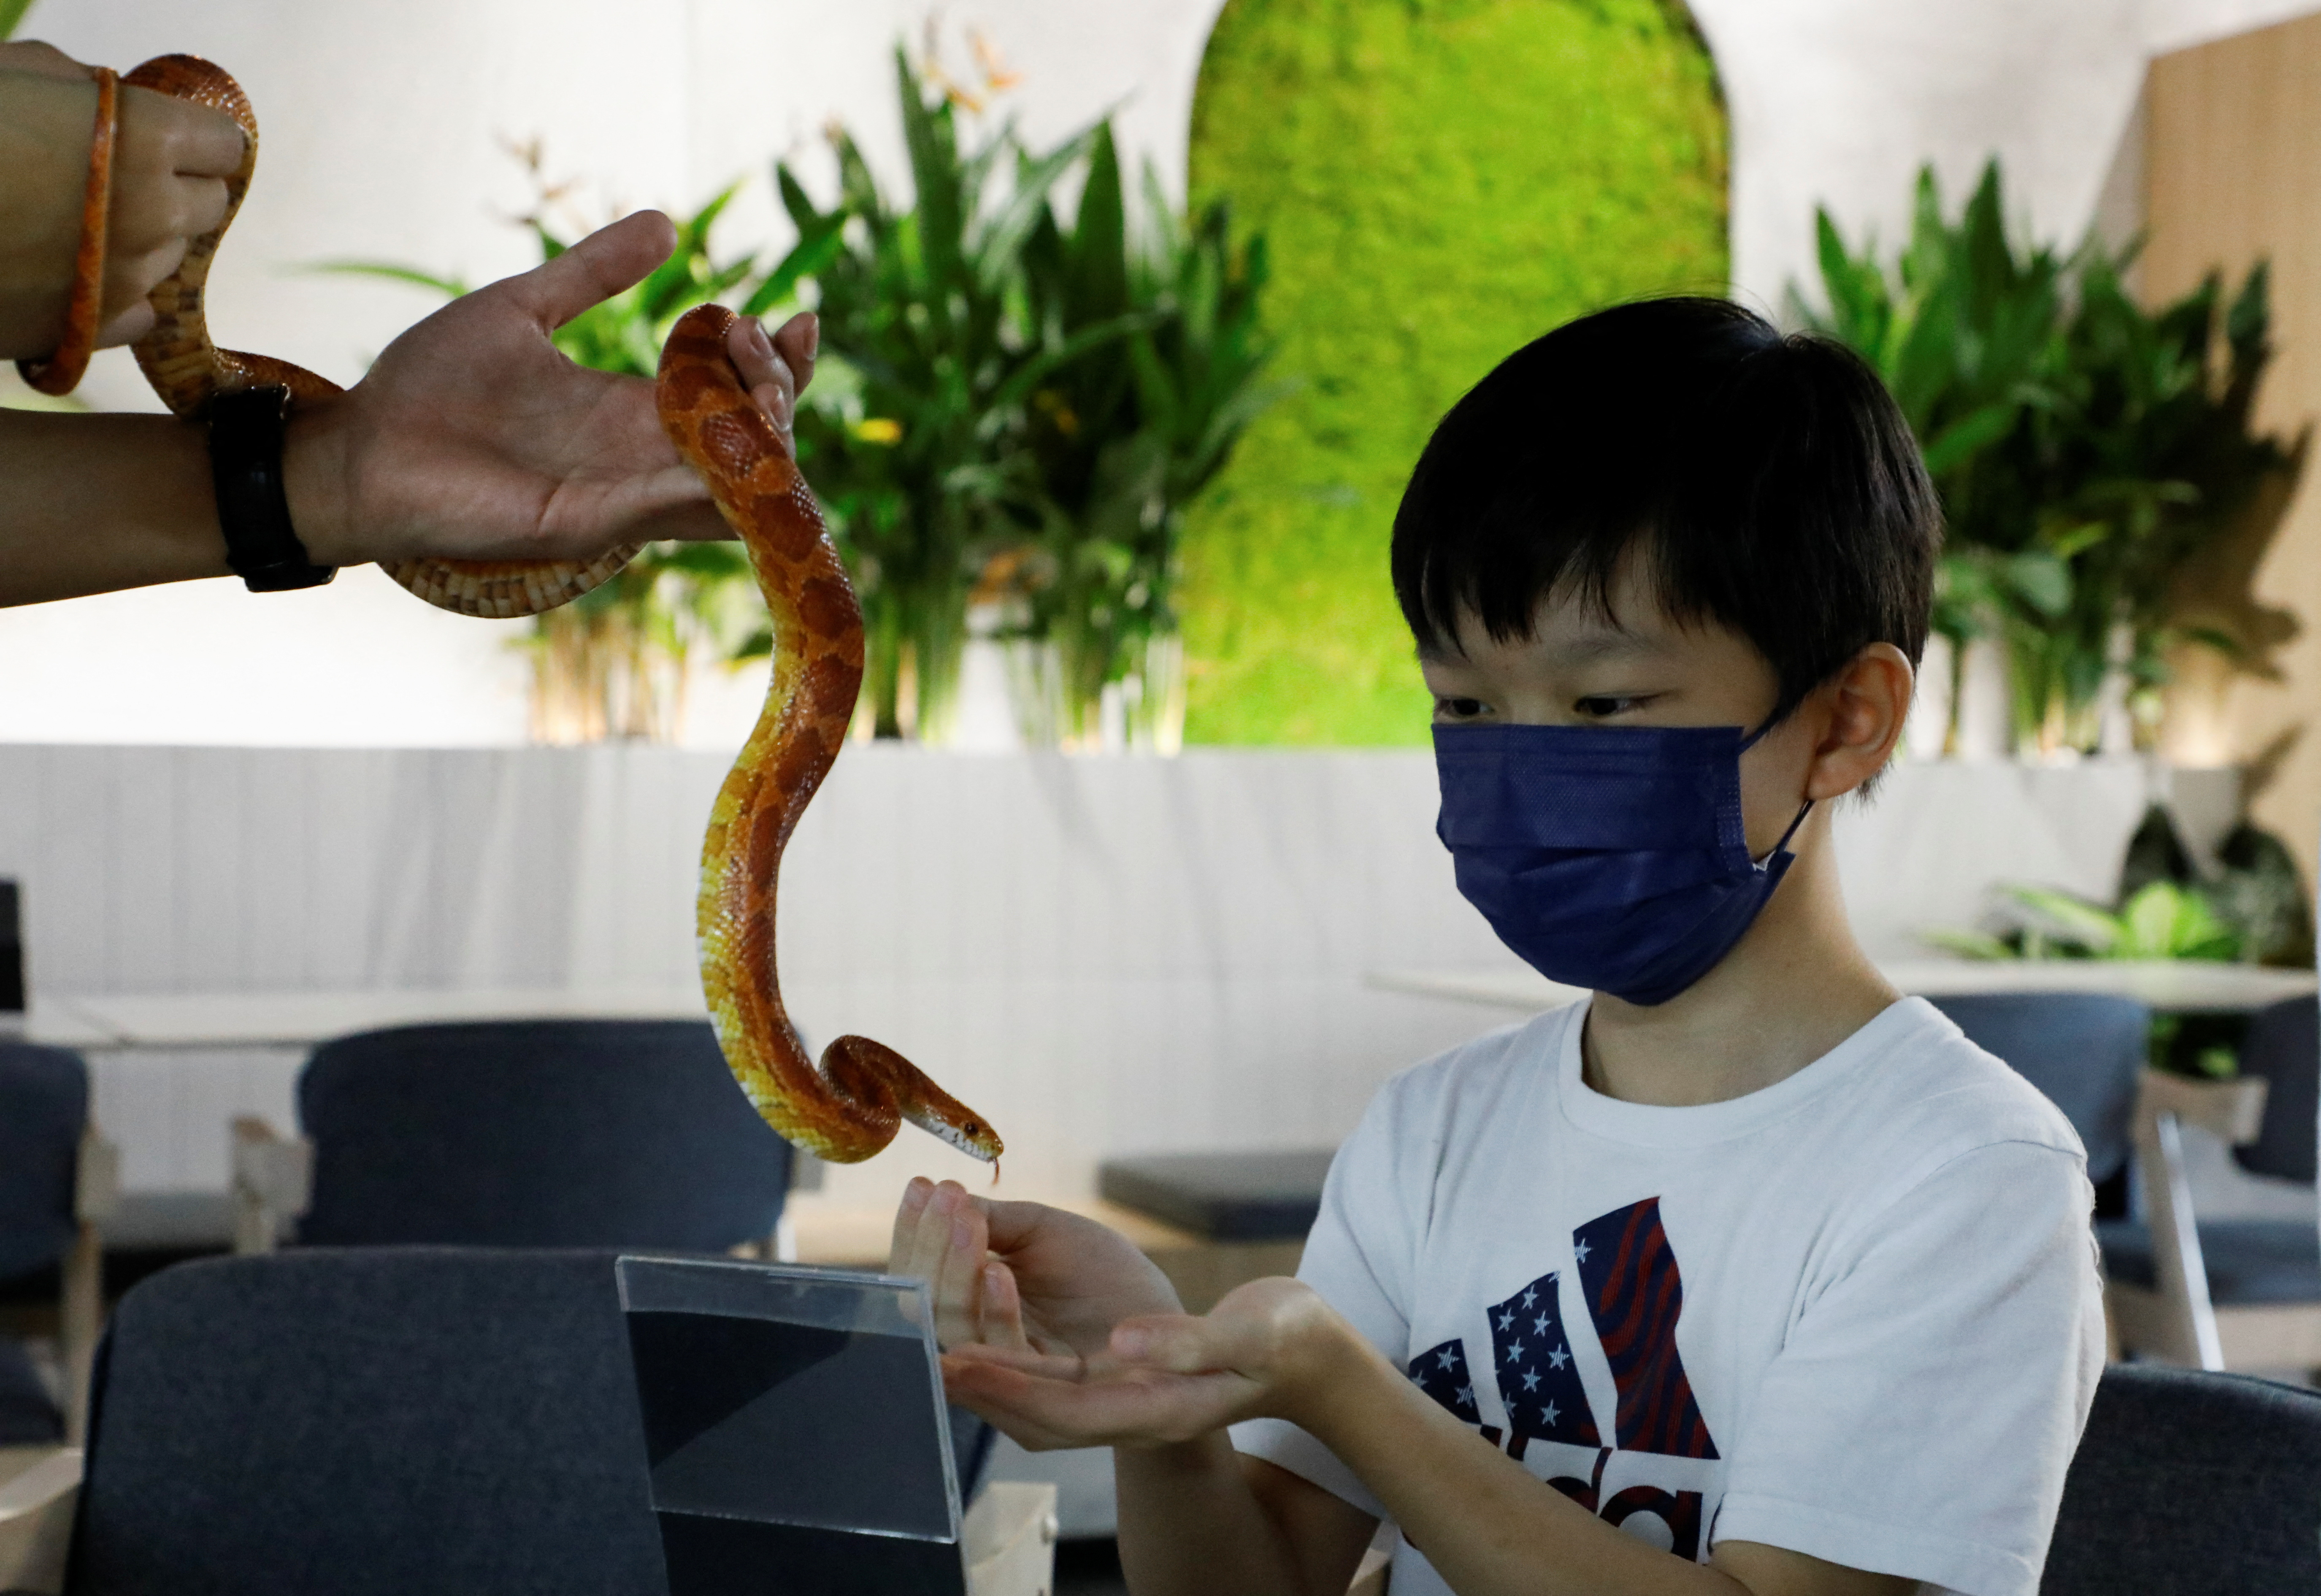 Felix Goh, 11, a visitor at Fangs by Dekori cafe, holds a corn snake at the reptile-themed cafe in Subang Jaya